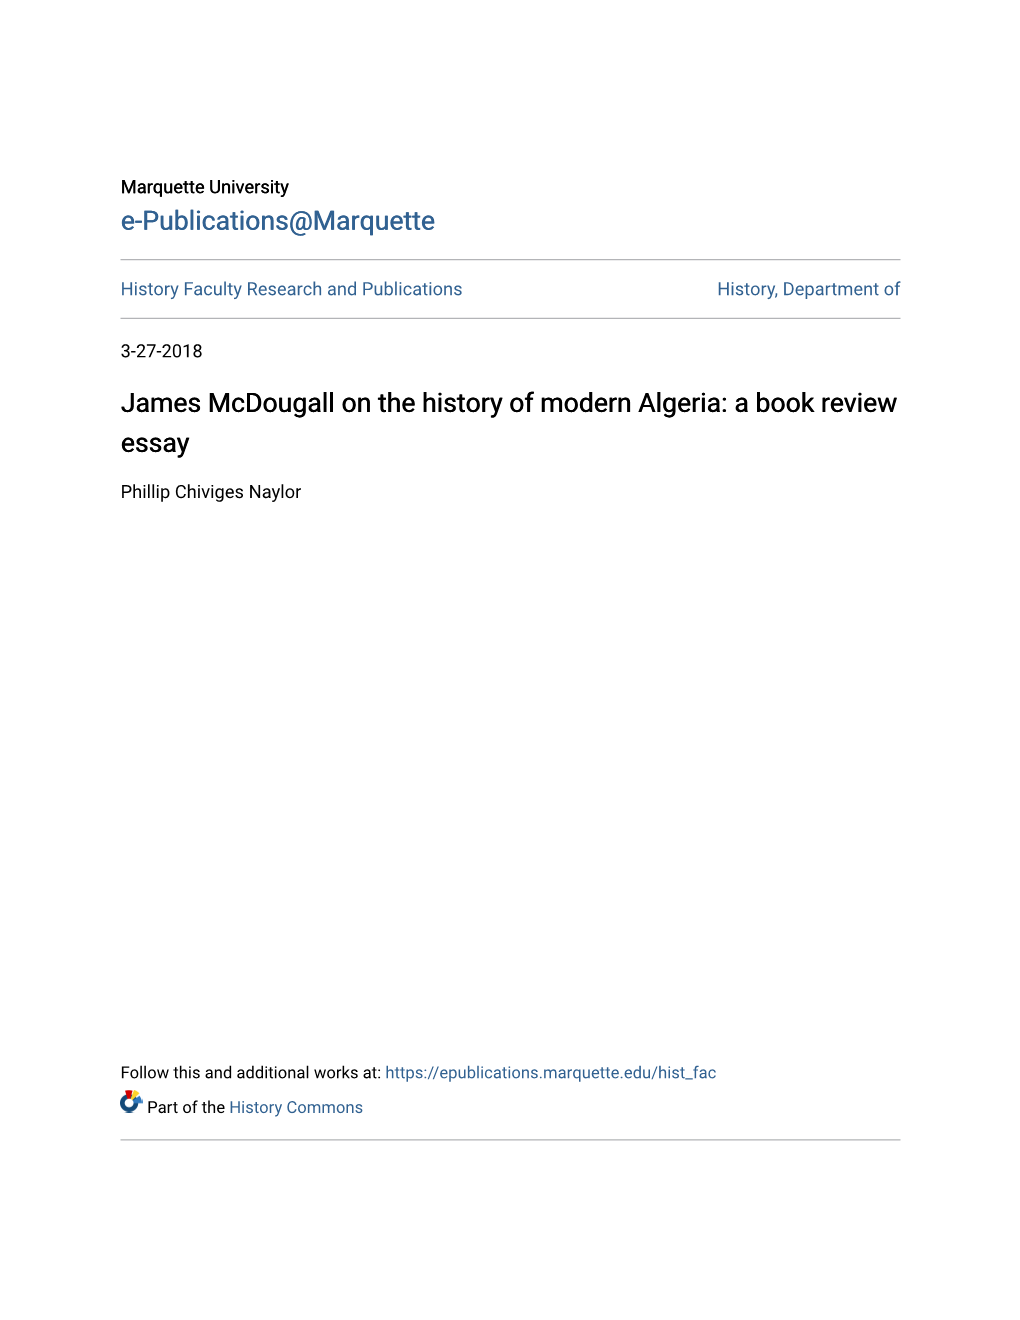 James Mcdougall on the History of Modern Algeria: a Book Review Essay